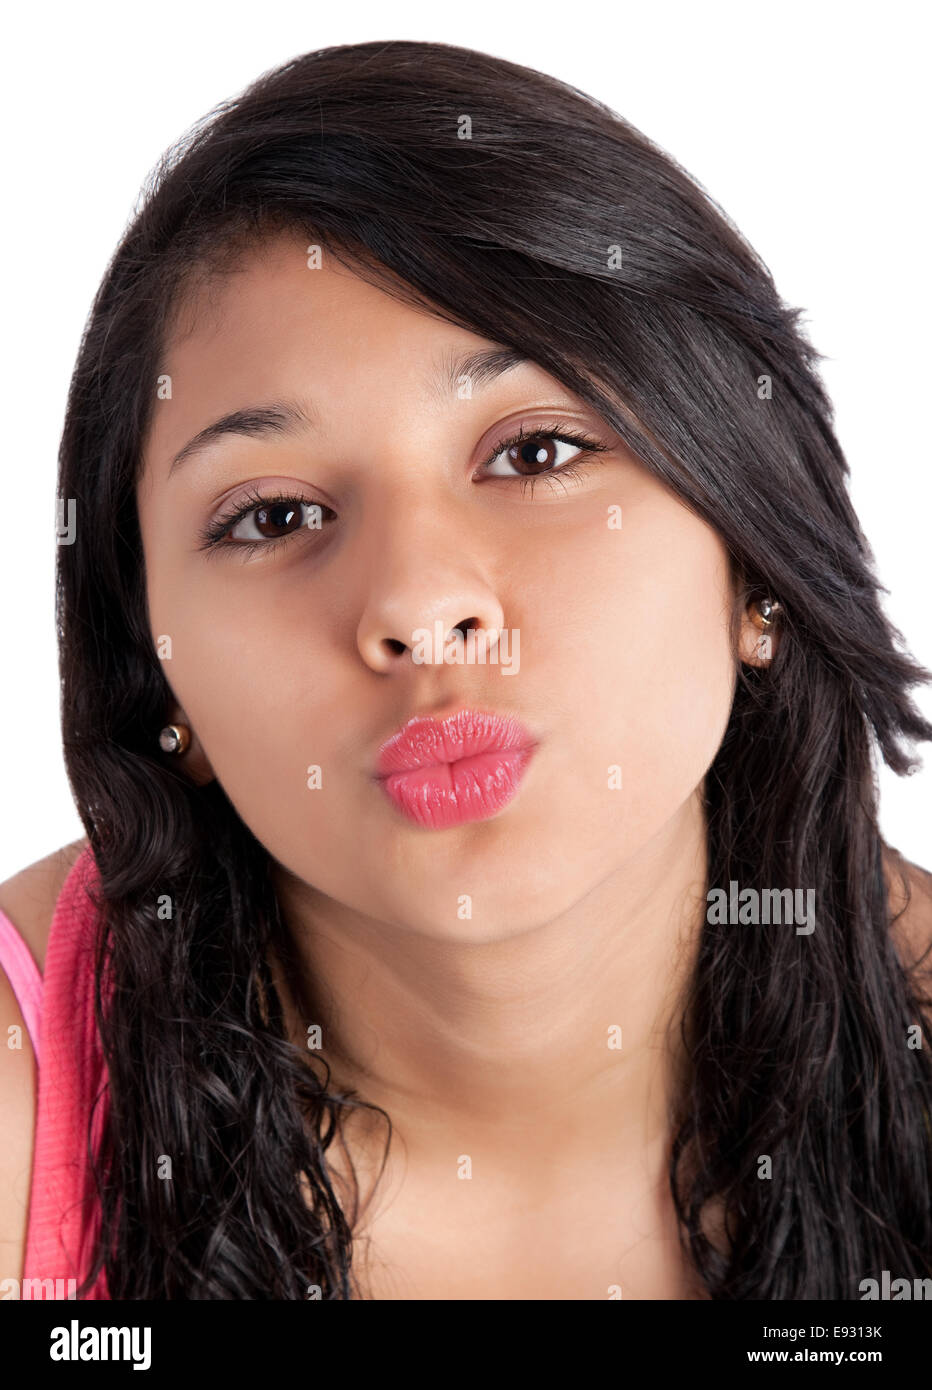 portrait of a young girl giving kiss Stock Photo